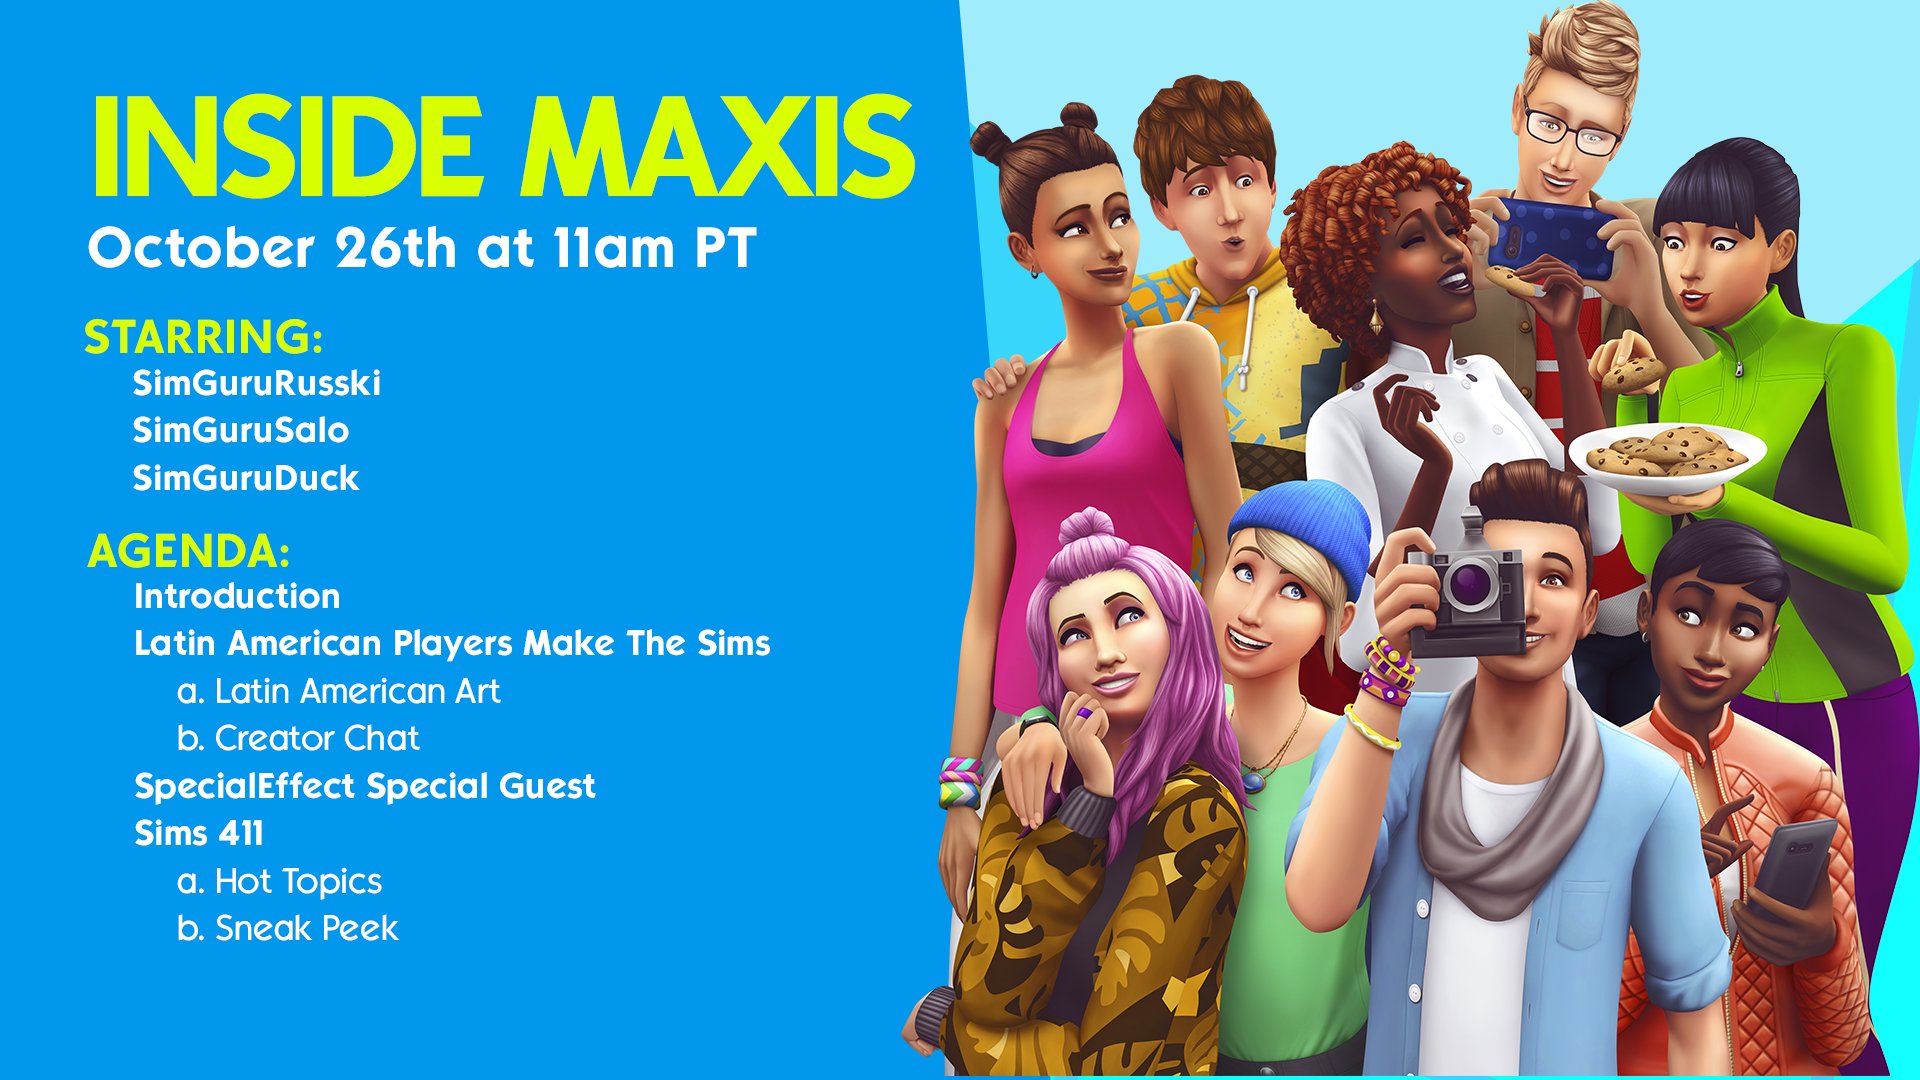 Insider Maxis - The Sims 4 News for November and December 2021 - The Sim Architect